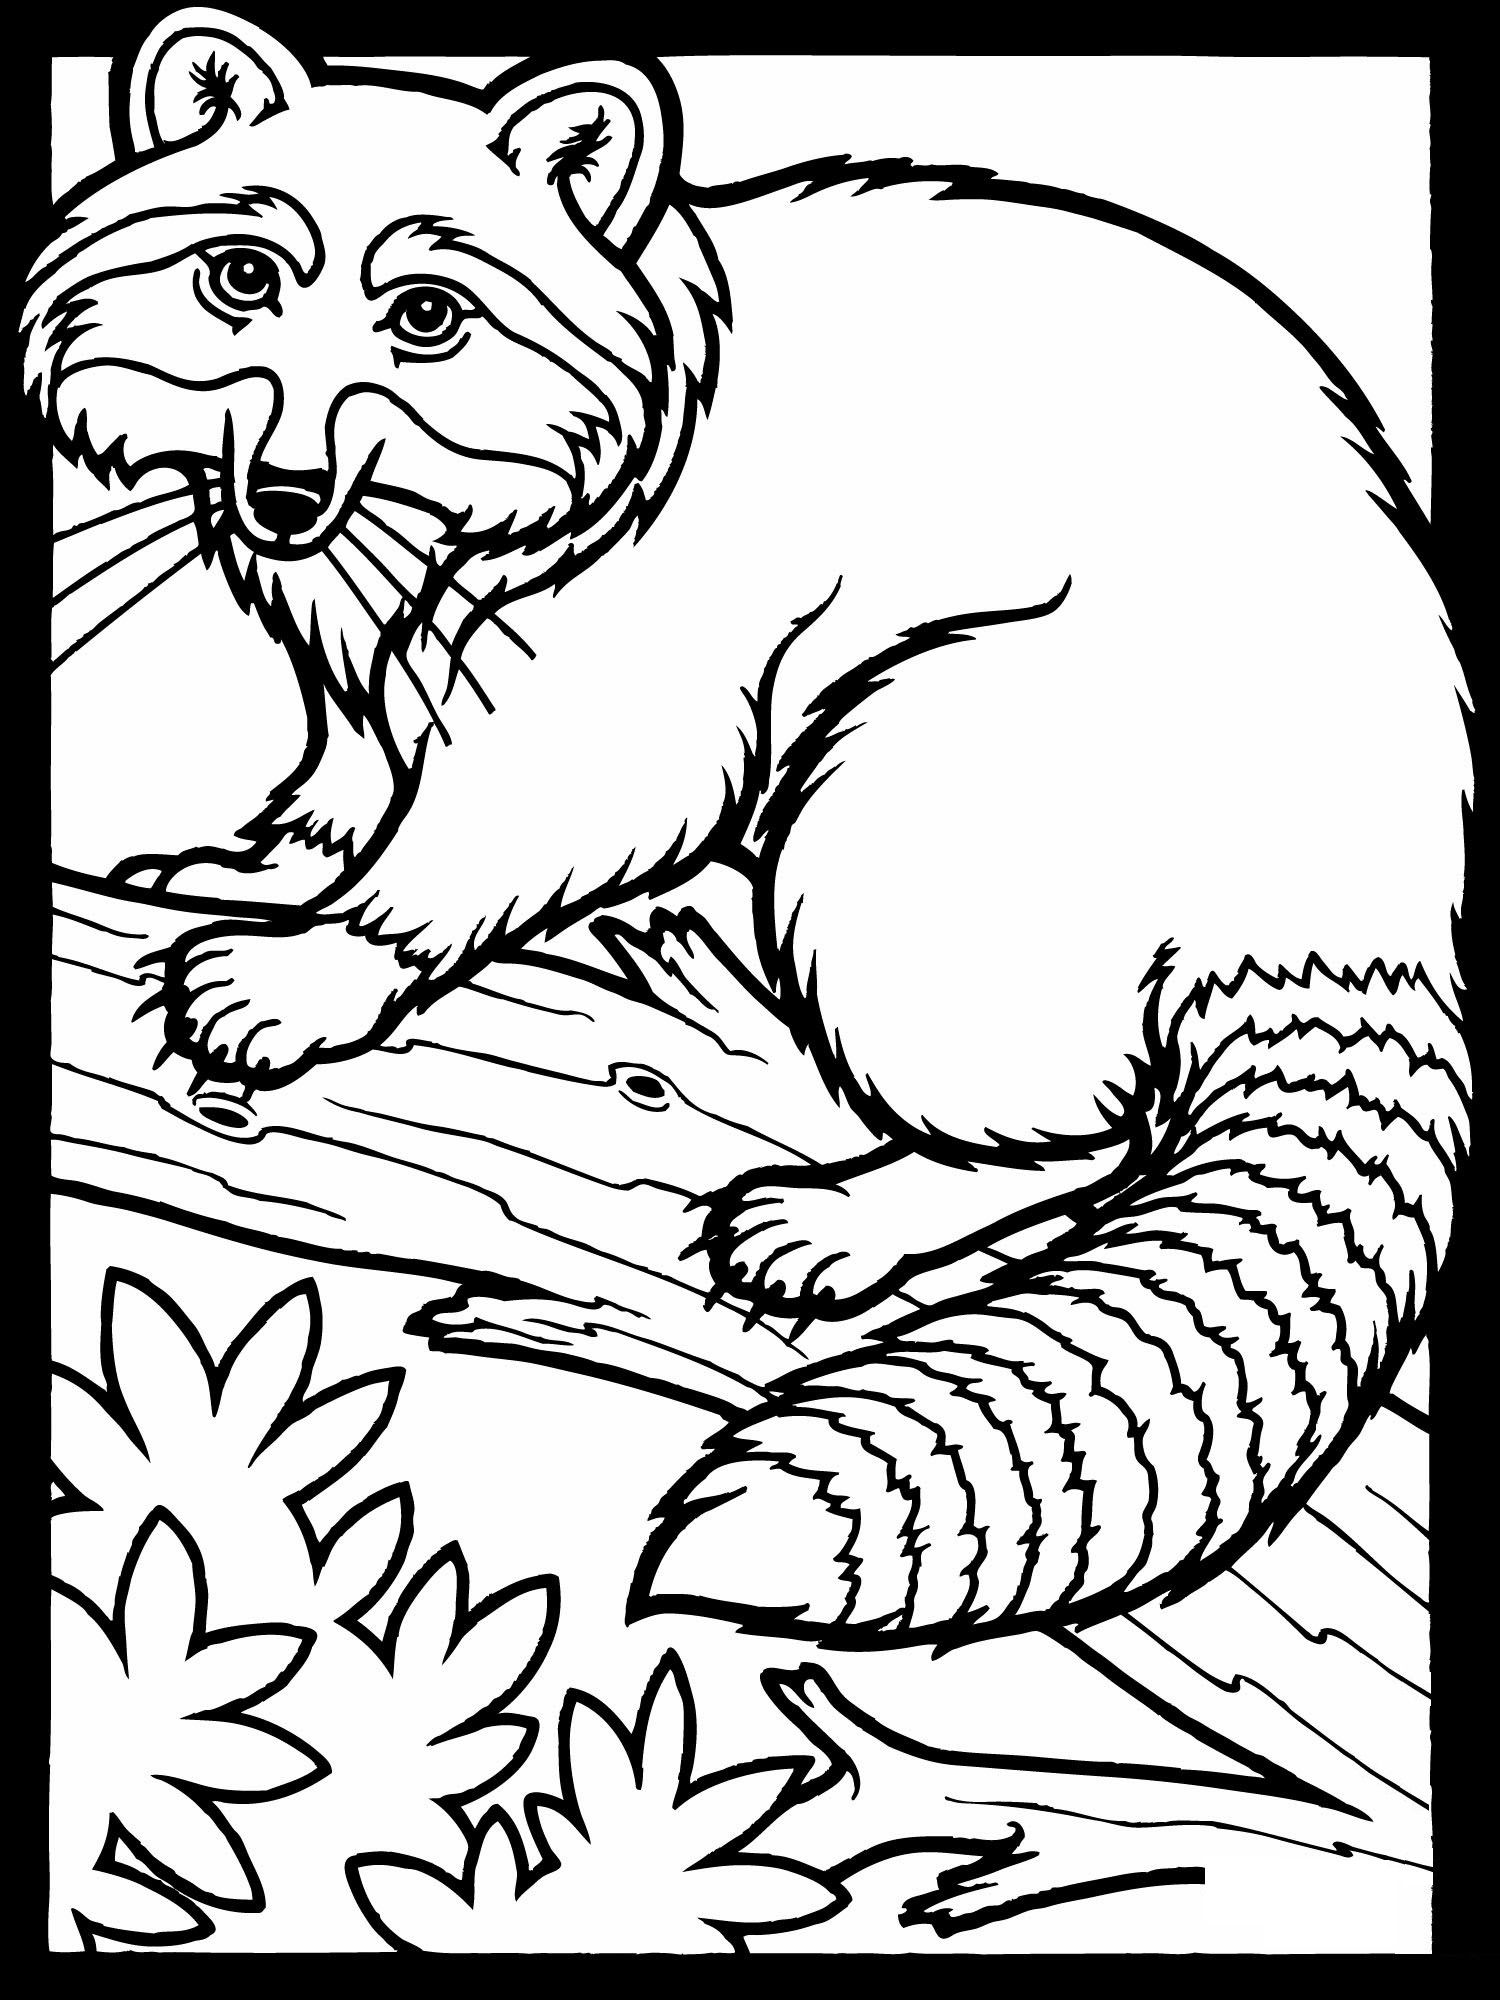 Free printable raccoon coloring pages for kids animal coloring pages coloring pages for kids coloring pages